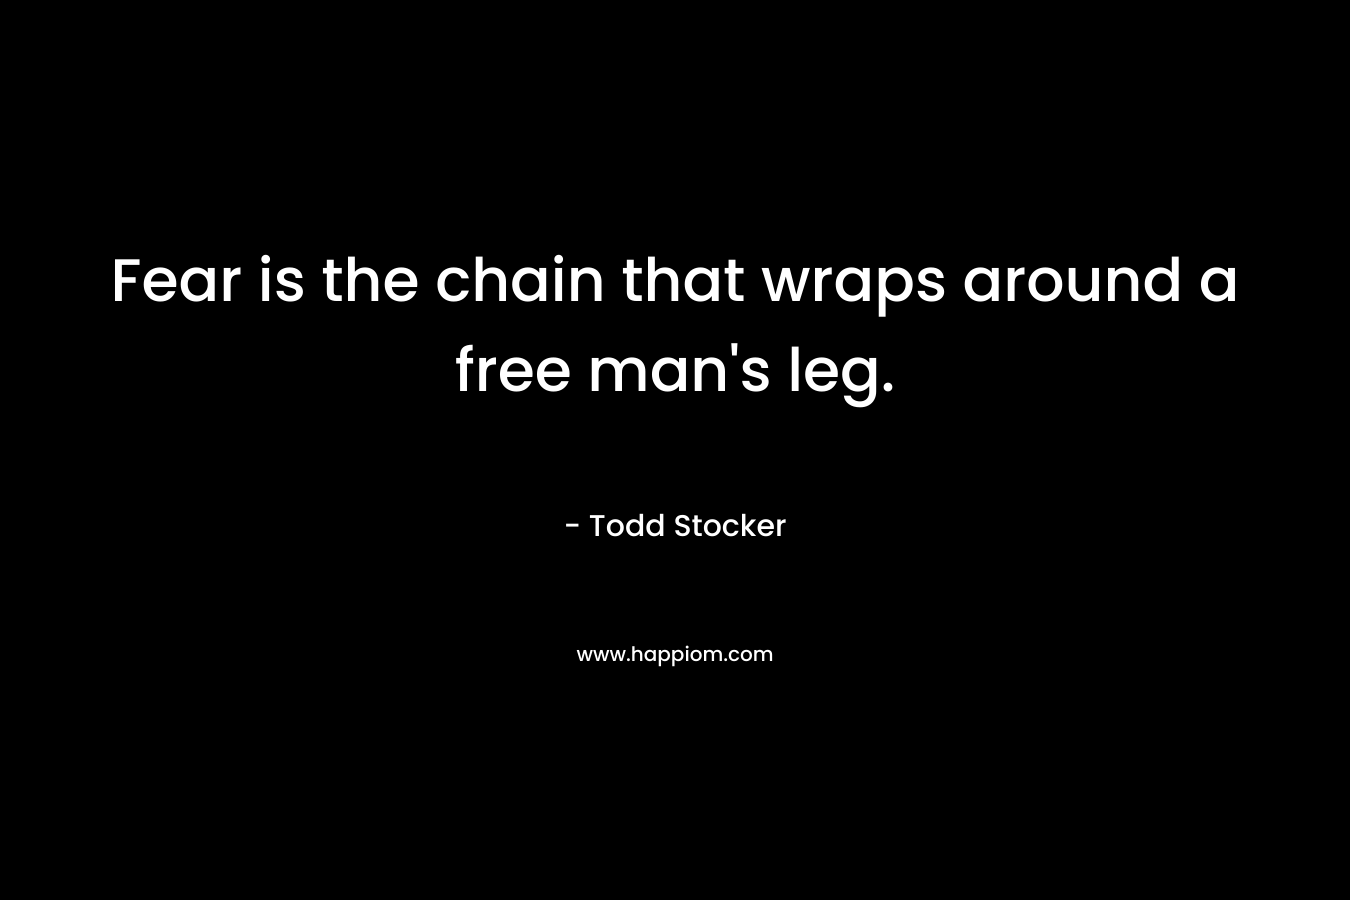 Fear is the chain that wraps around a free man’s leg. – Todd Stocker